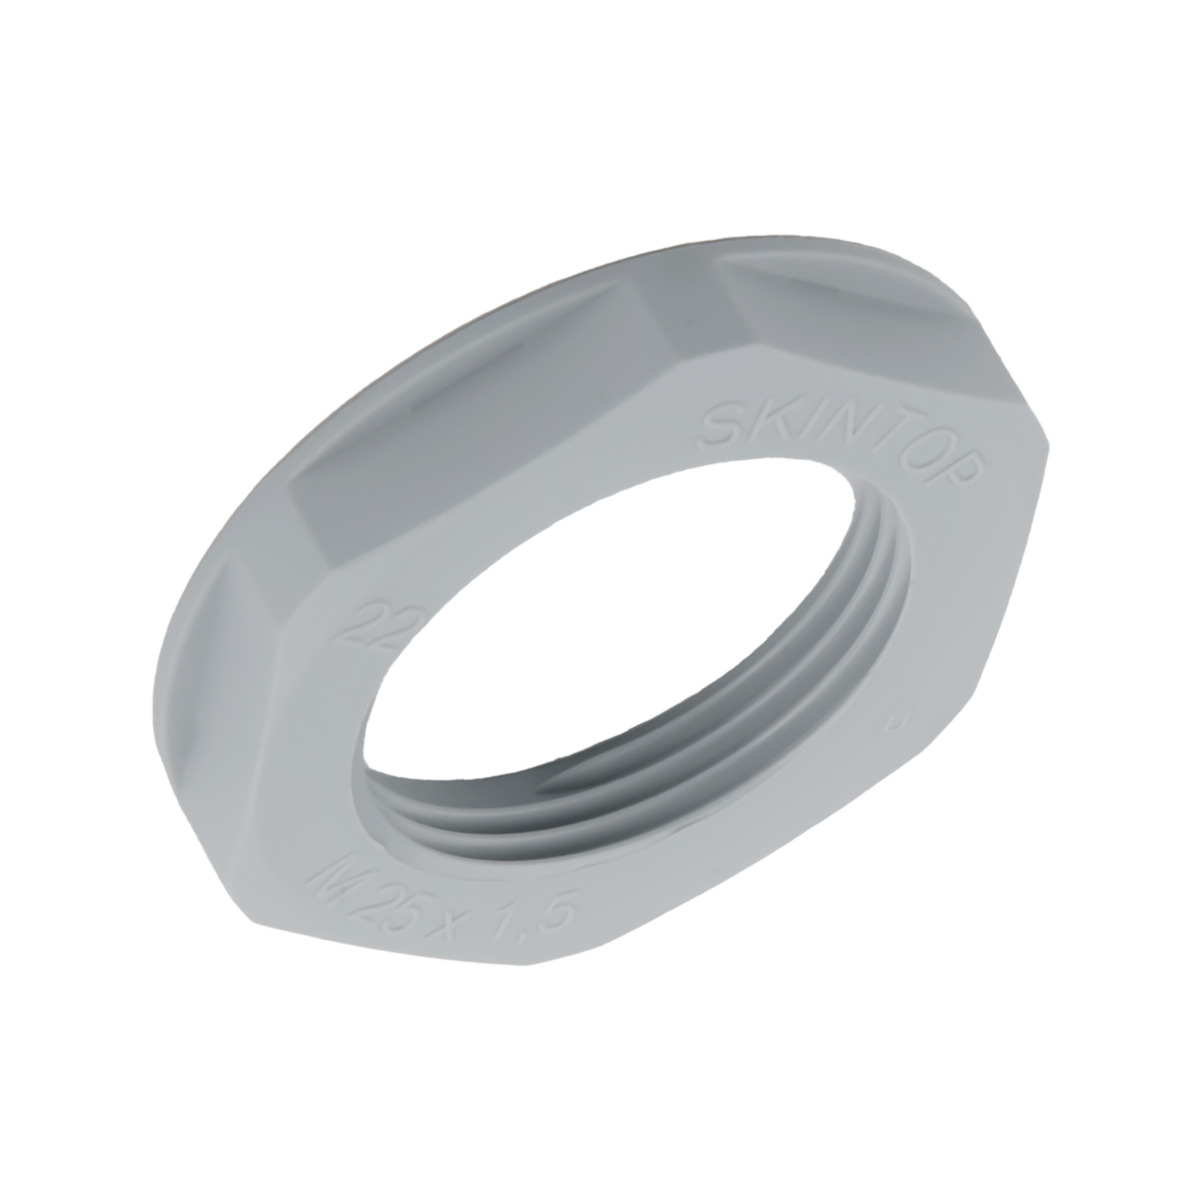 SKINTOP® GMP-GL-M counter nut